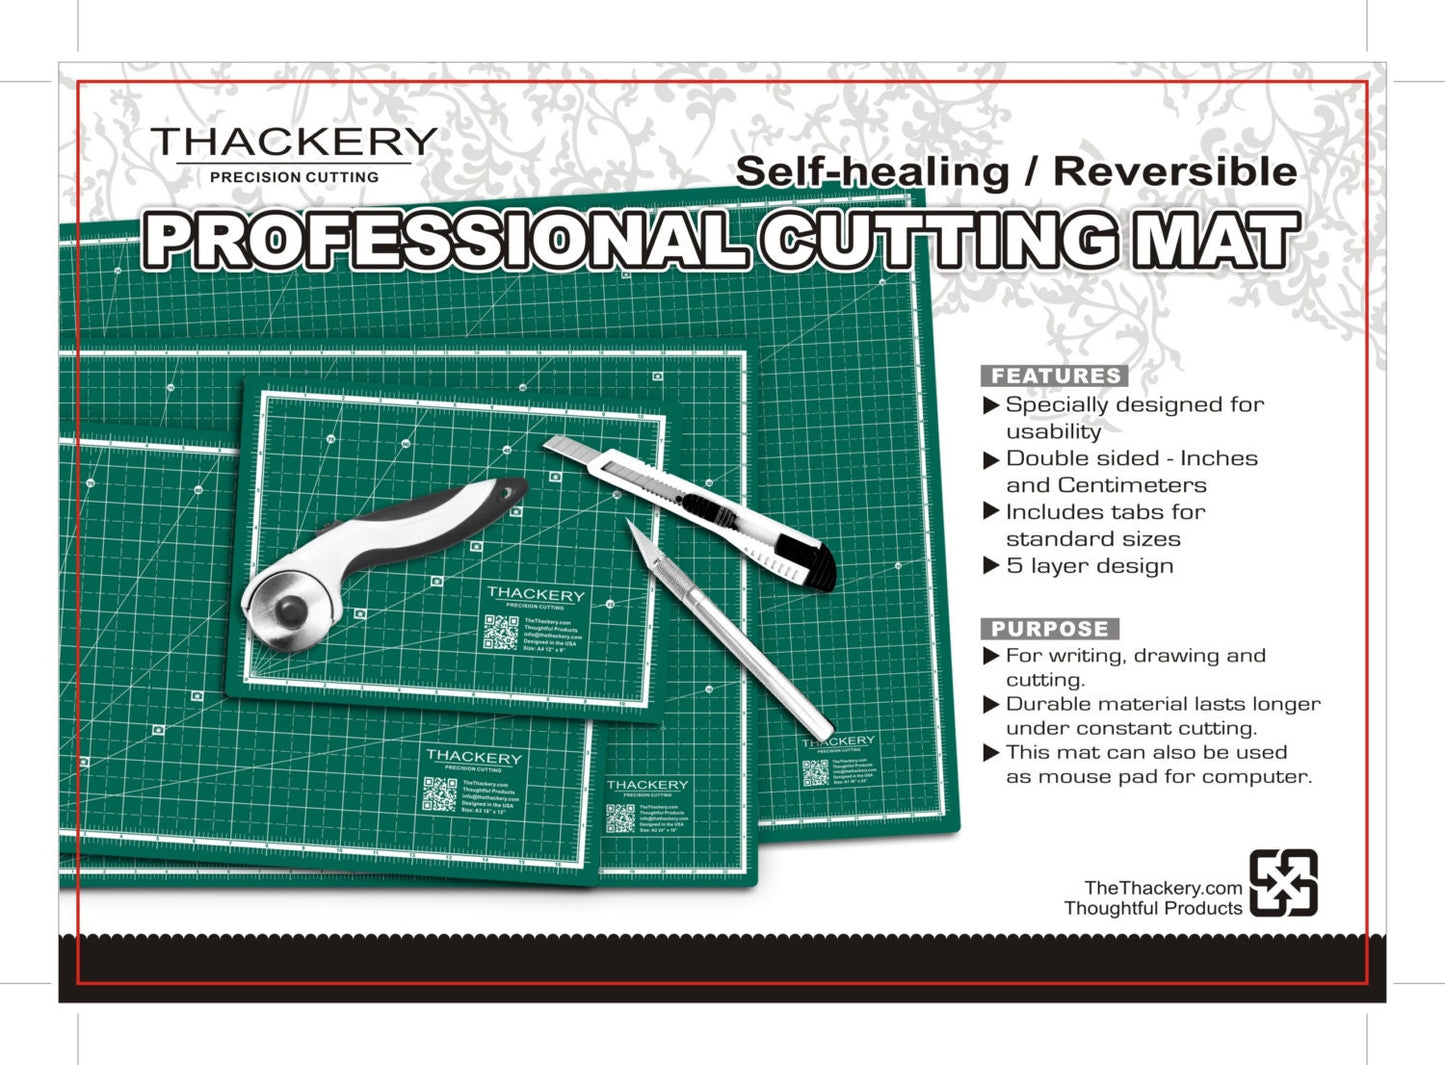 Size A2 - 18" x 24" Self-Healing CUTTING MAT - Reversible Inches and Centimeters - thoughtful design - 5 layer mat,  finest available